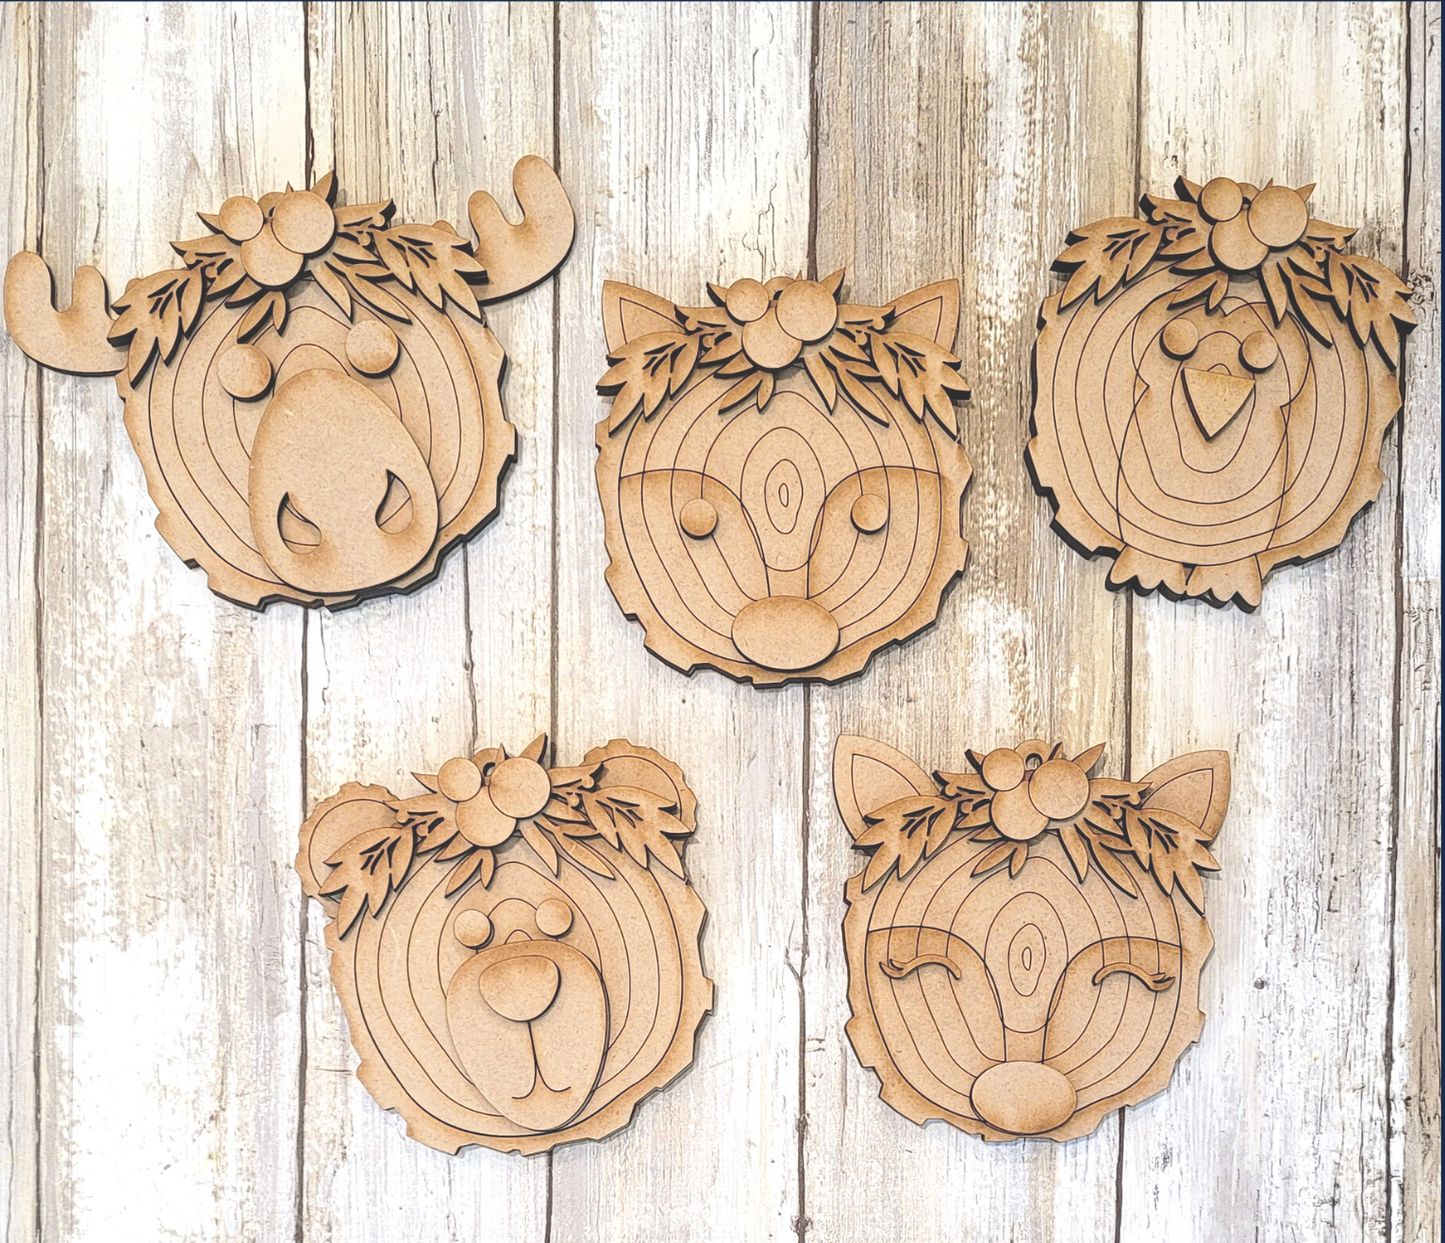 DIY Handcrafted Wood Slice Animal Ornaments - Christmas and Year Round Display